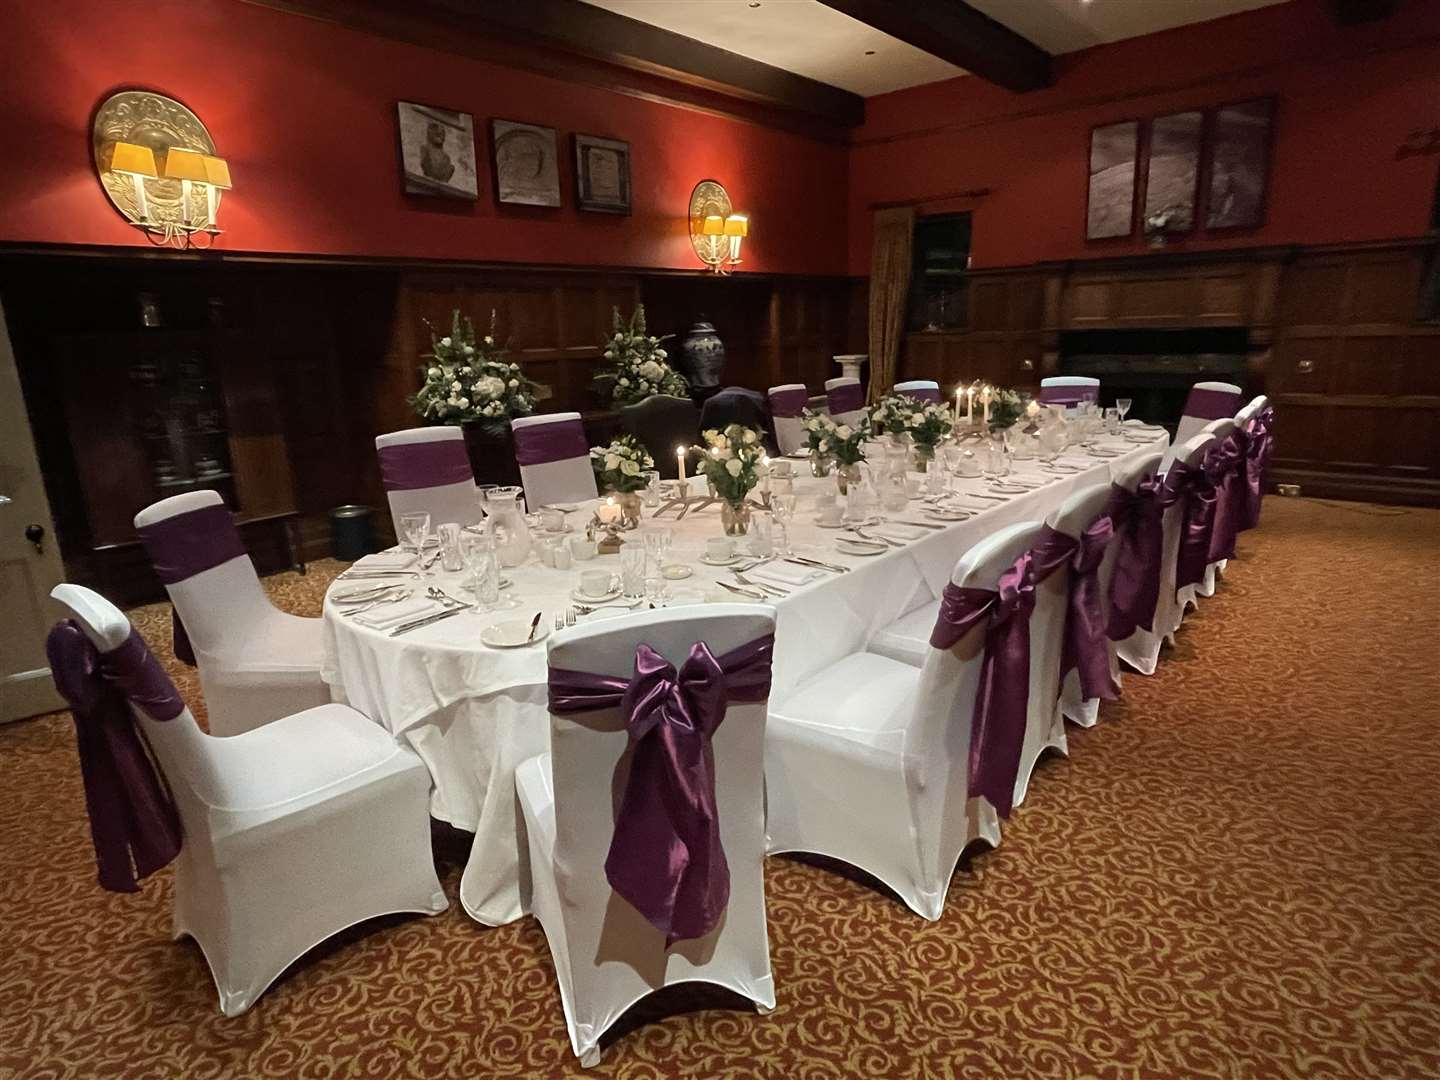 There are fabulous rooms for more intimate gatherings as well as large weddings.